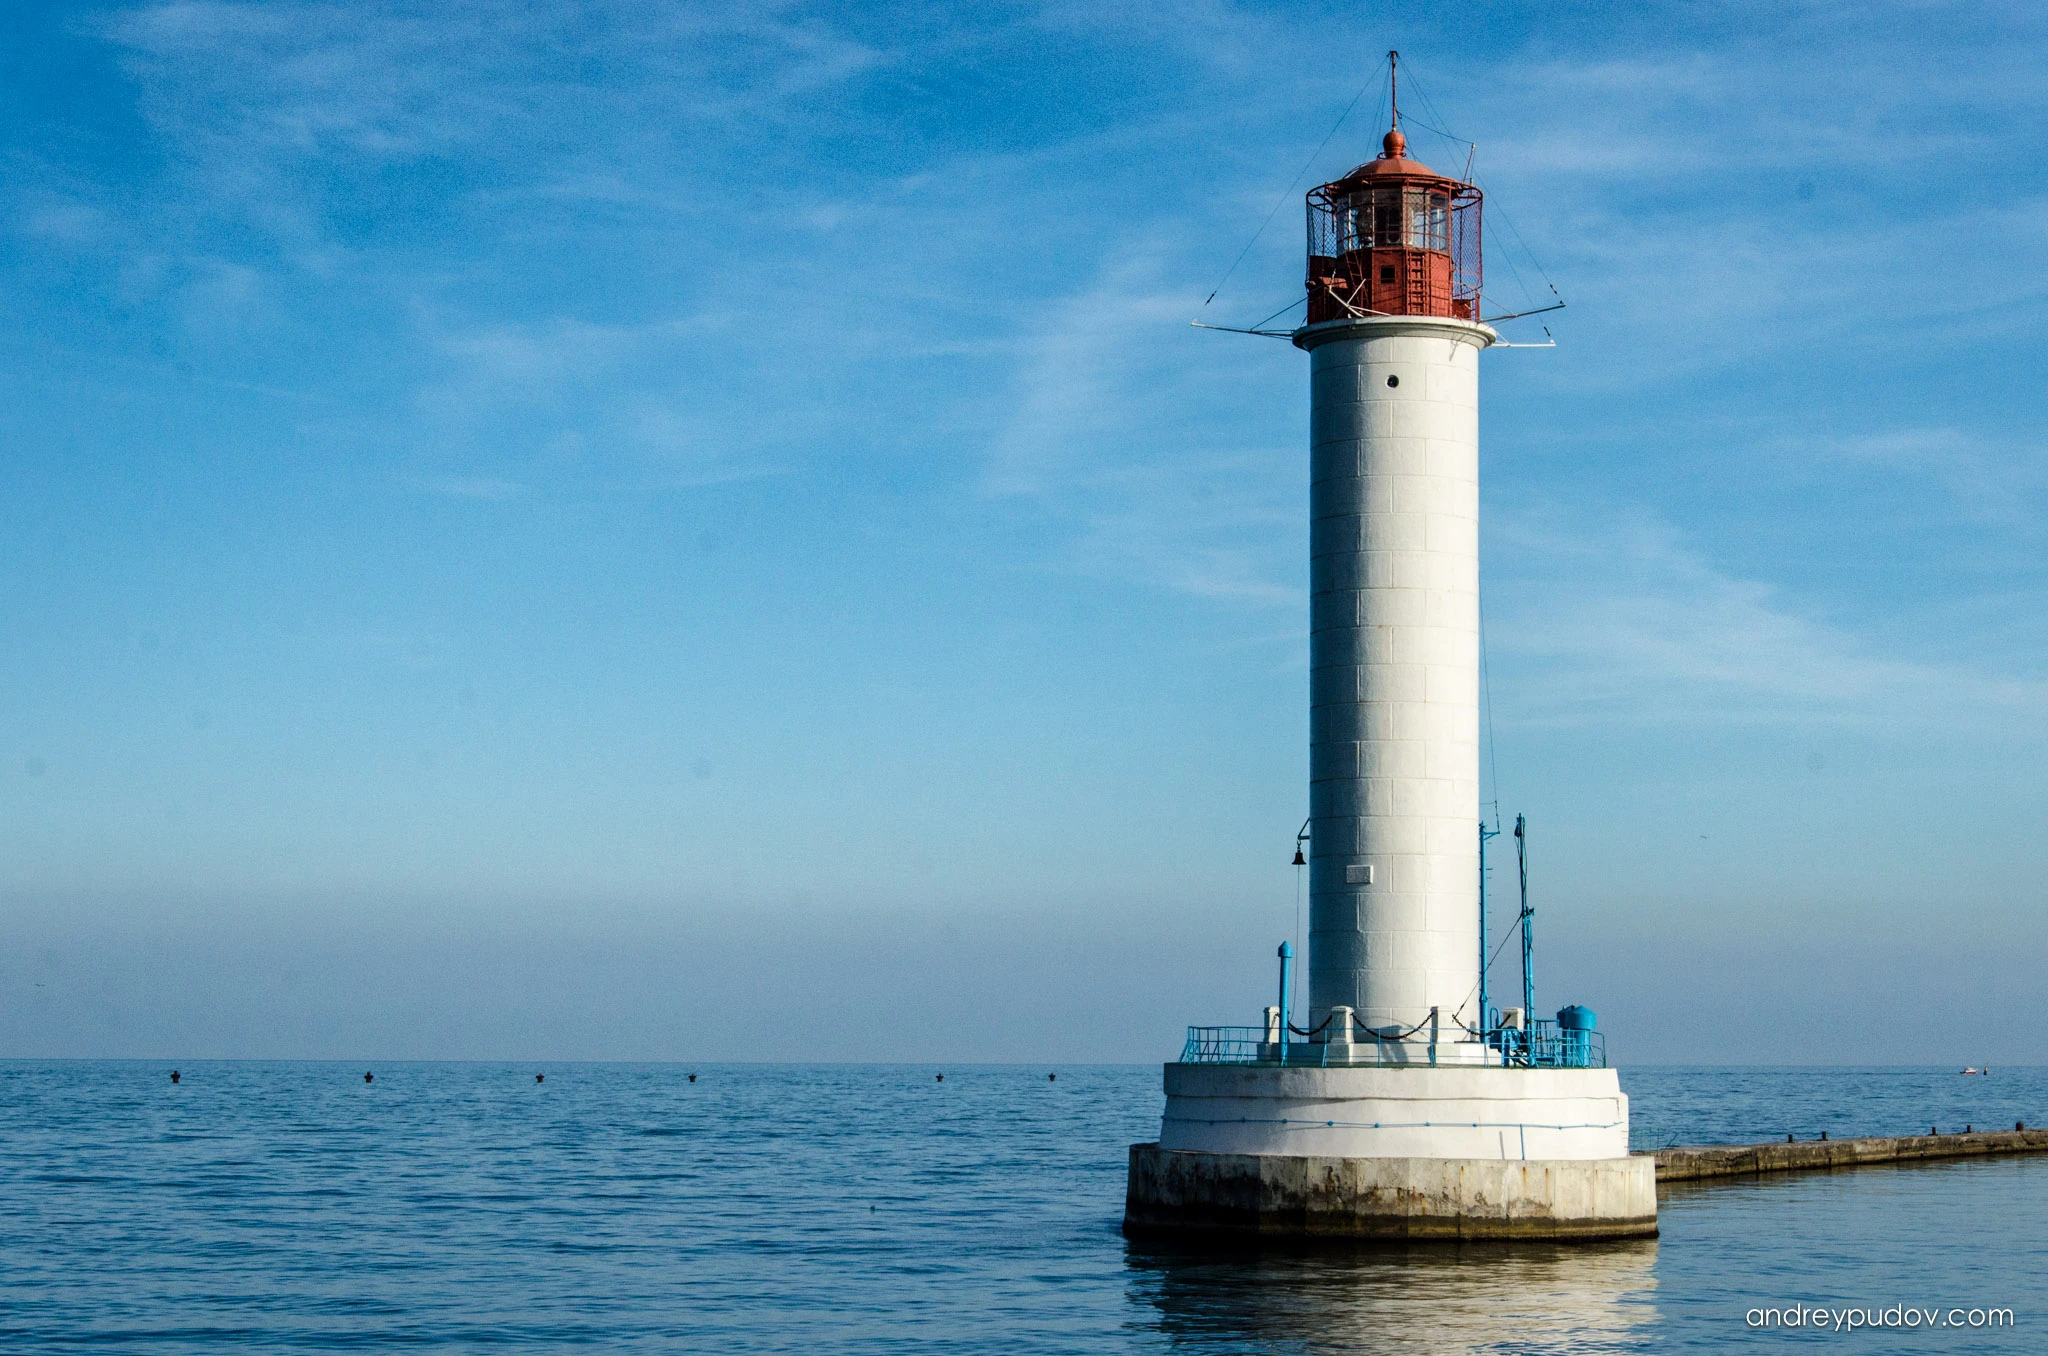 Favorite Photographs - The Vorontsov Lighthouse is a red-and-white, 27.2-meter tall lighthouse in the Black Sea port of Odessa. It is named after Prince Mikhail Semyonovich Vorontsov, one of the governors-general of the Odessa region. It has a one-million-watt signal light that can be seen up to twelve nautical miles (22 km) away. It transmits the Morse Code signal of three dashes, the letter O, for Odessa. It also sounds like a foghorn during severe storms or fog.